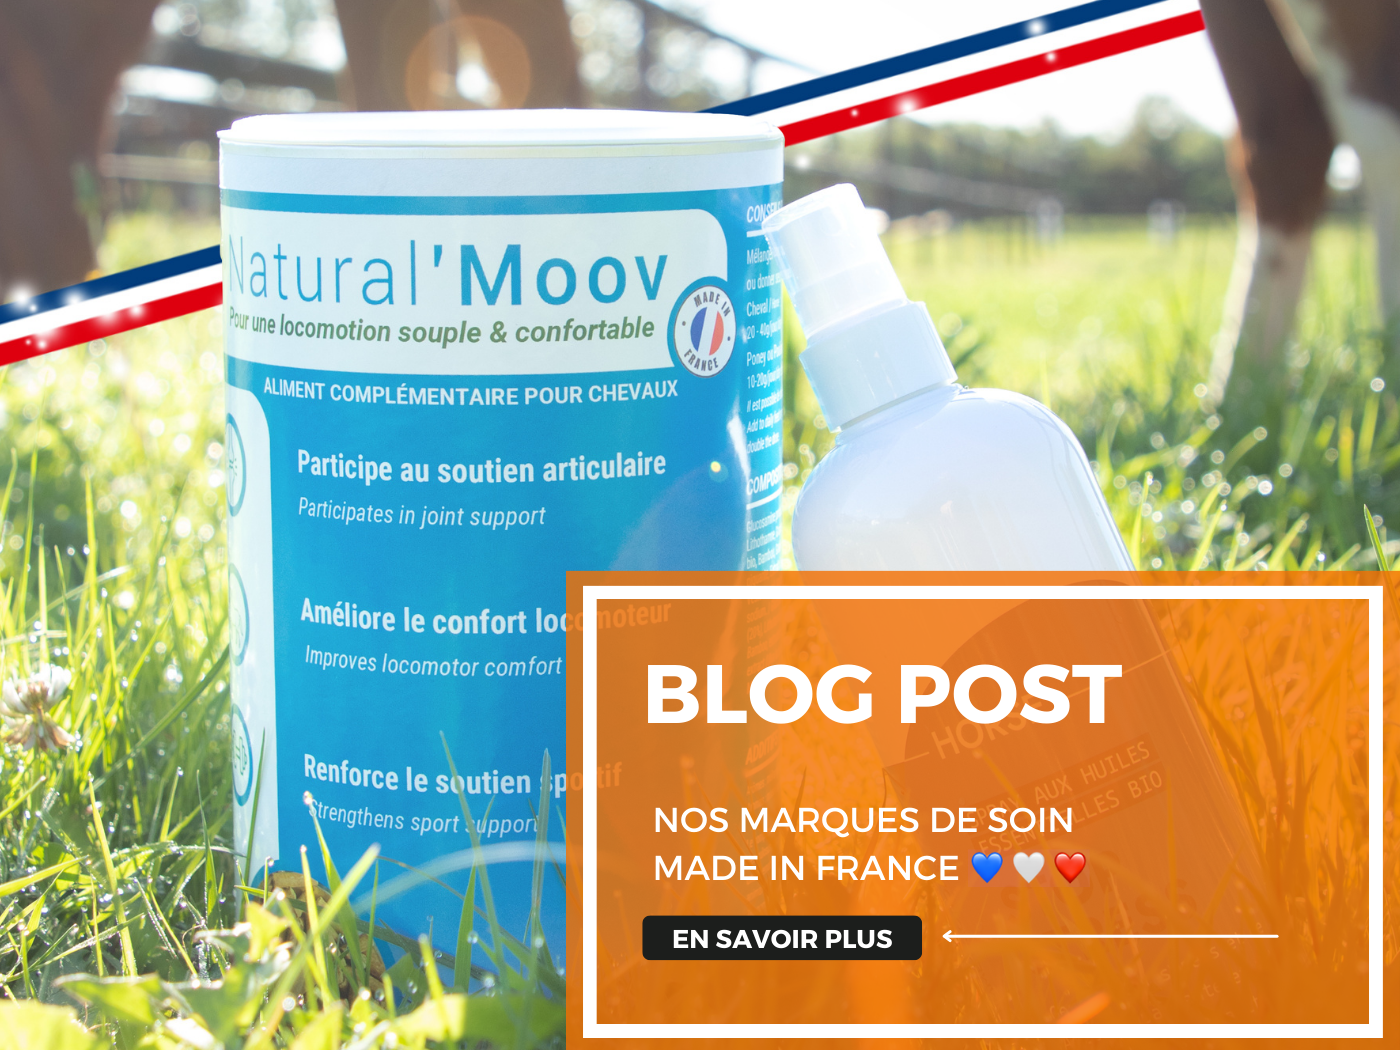 Nos marques de soins Made in France 💙🤍❤️